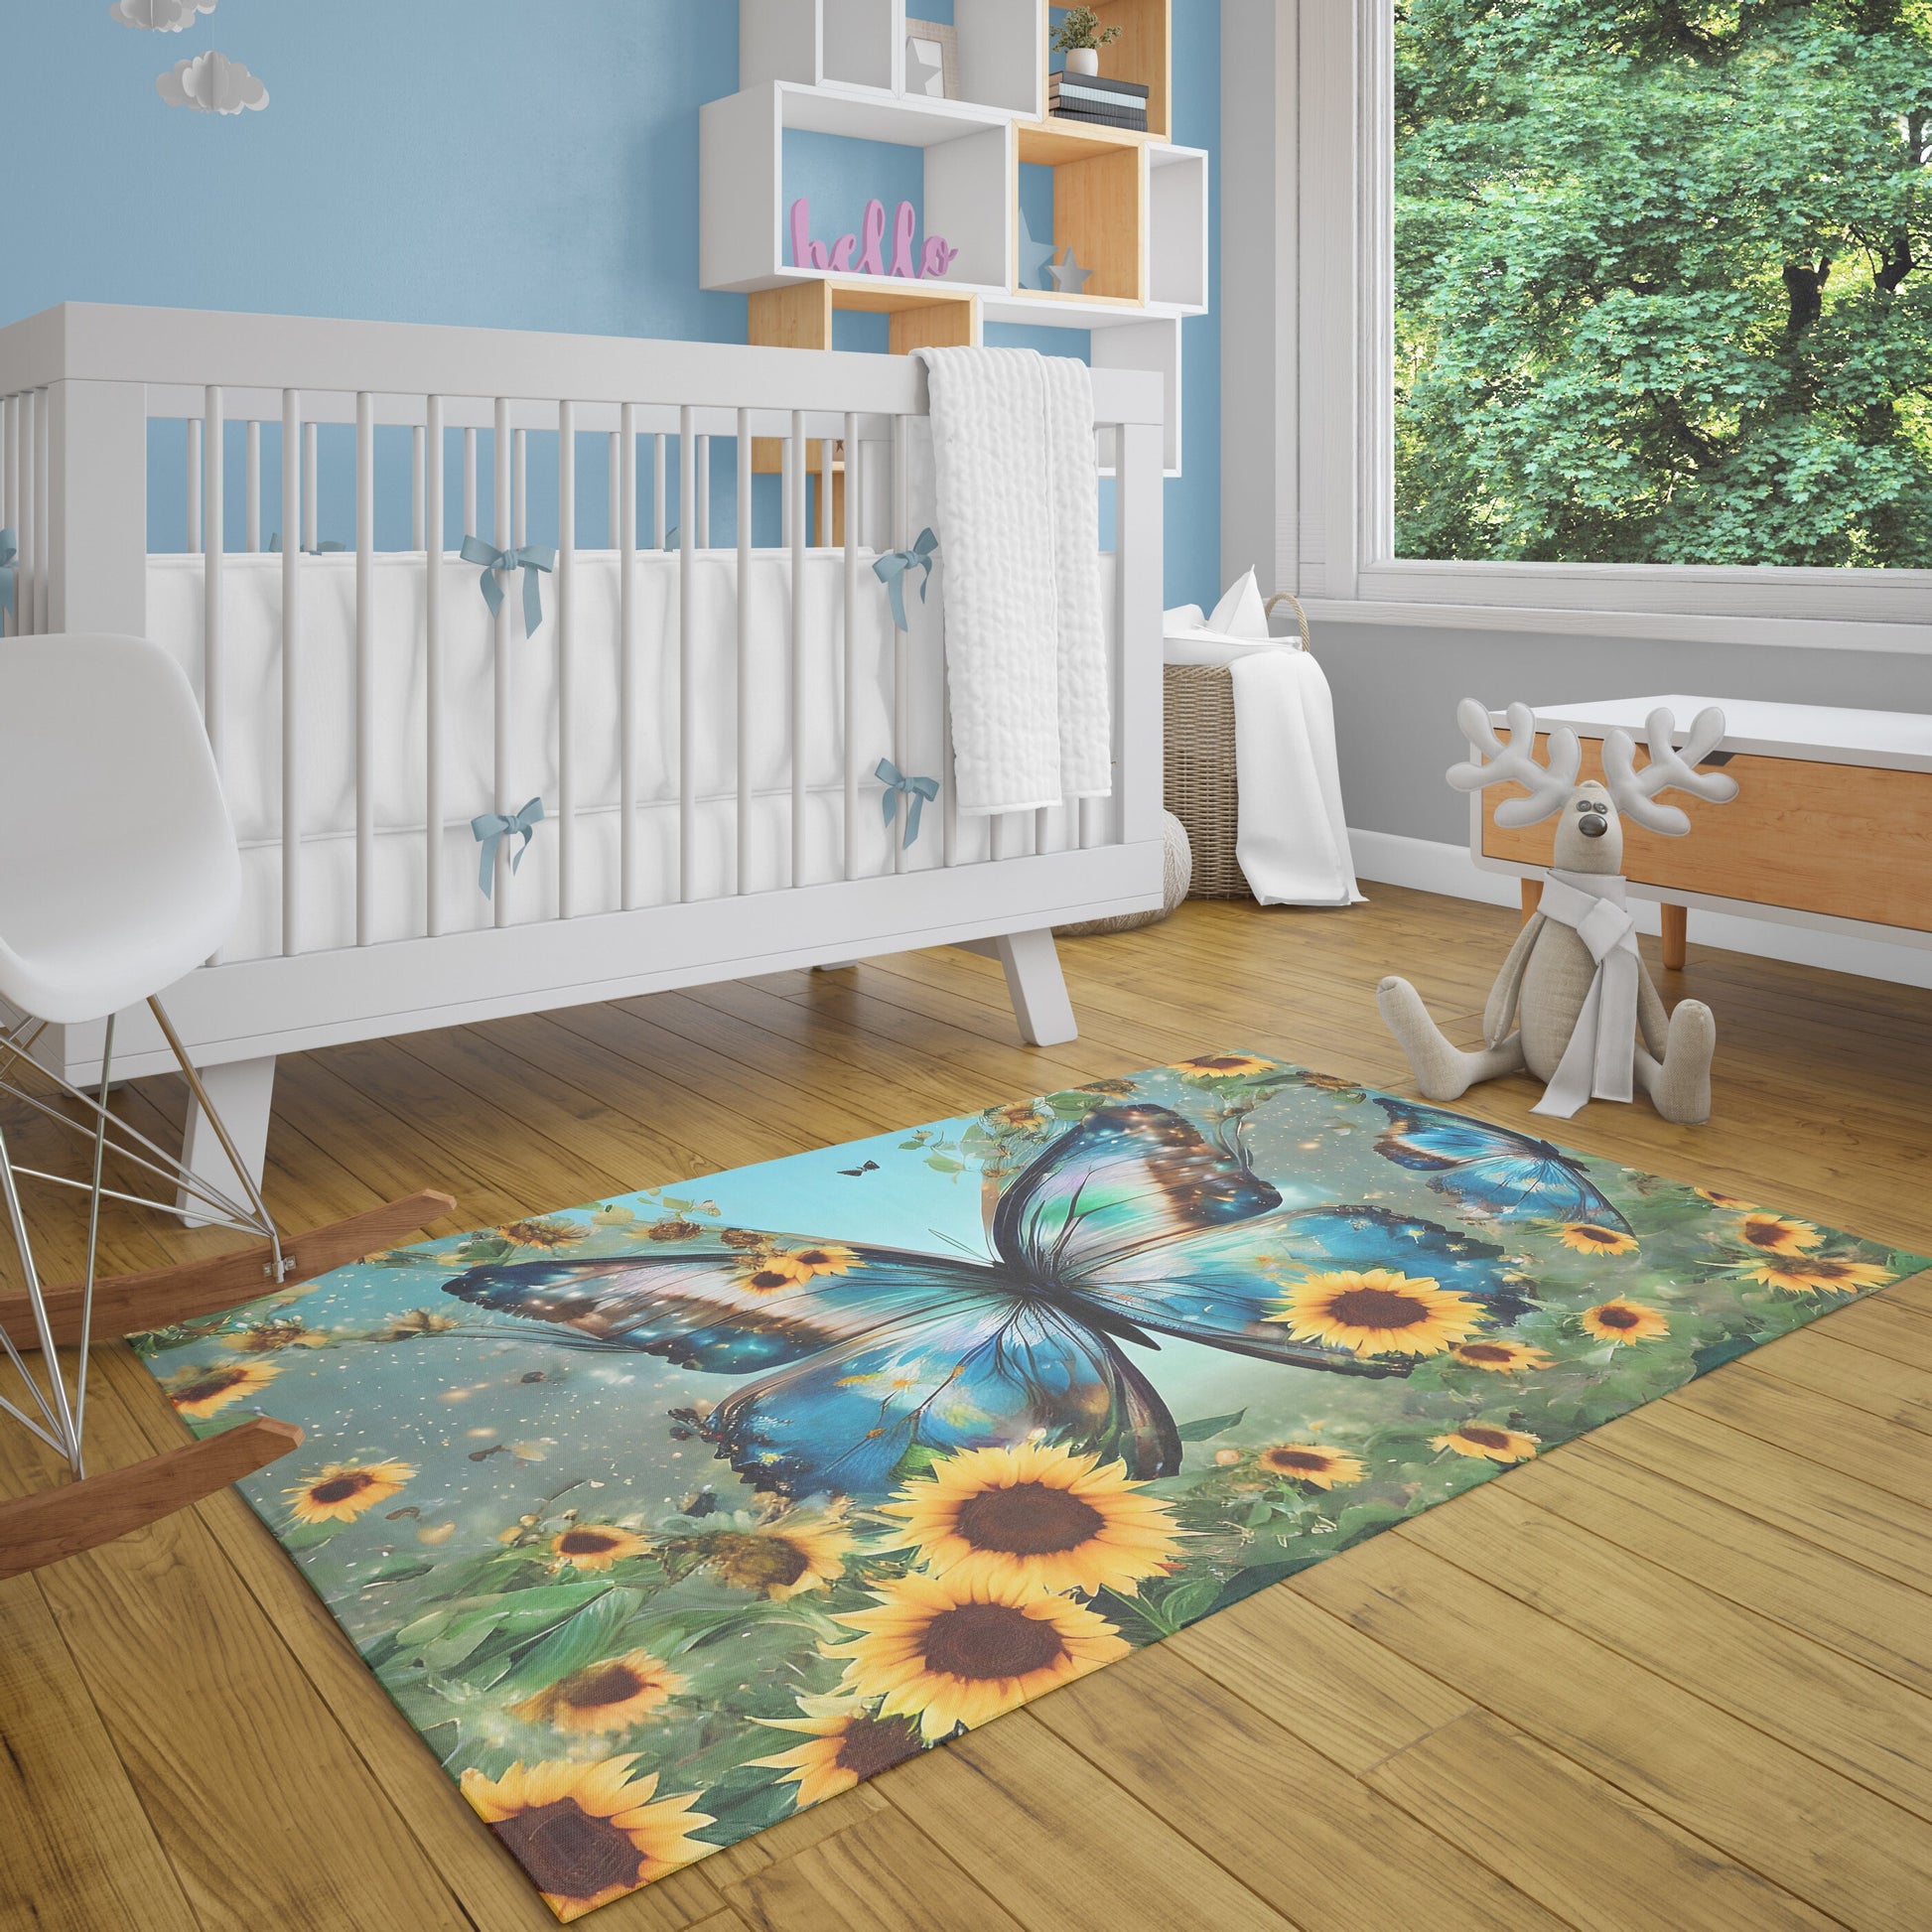 Butterfly Rug sunflowers Rug Blue Rug butterflies Floor Rugs 3'x5' 4'x6' 5'x7' Large rugs blue yellow